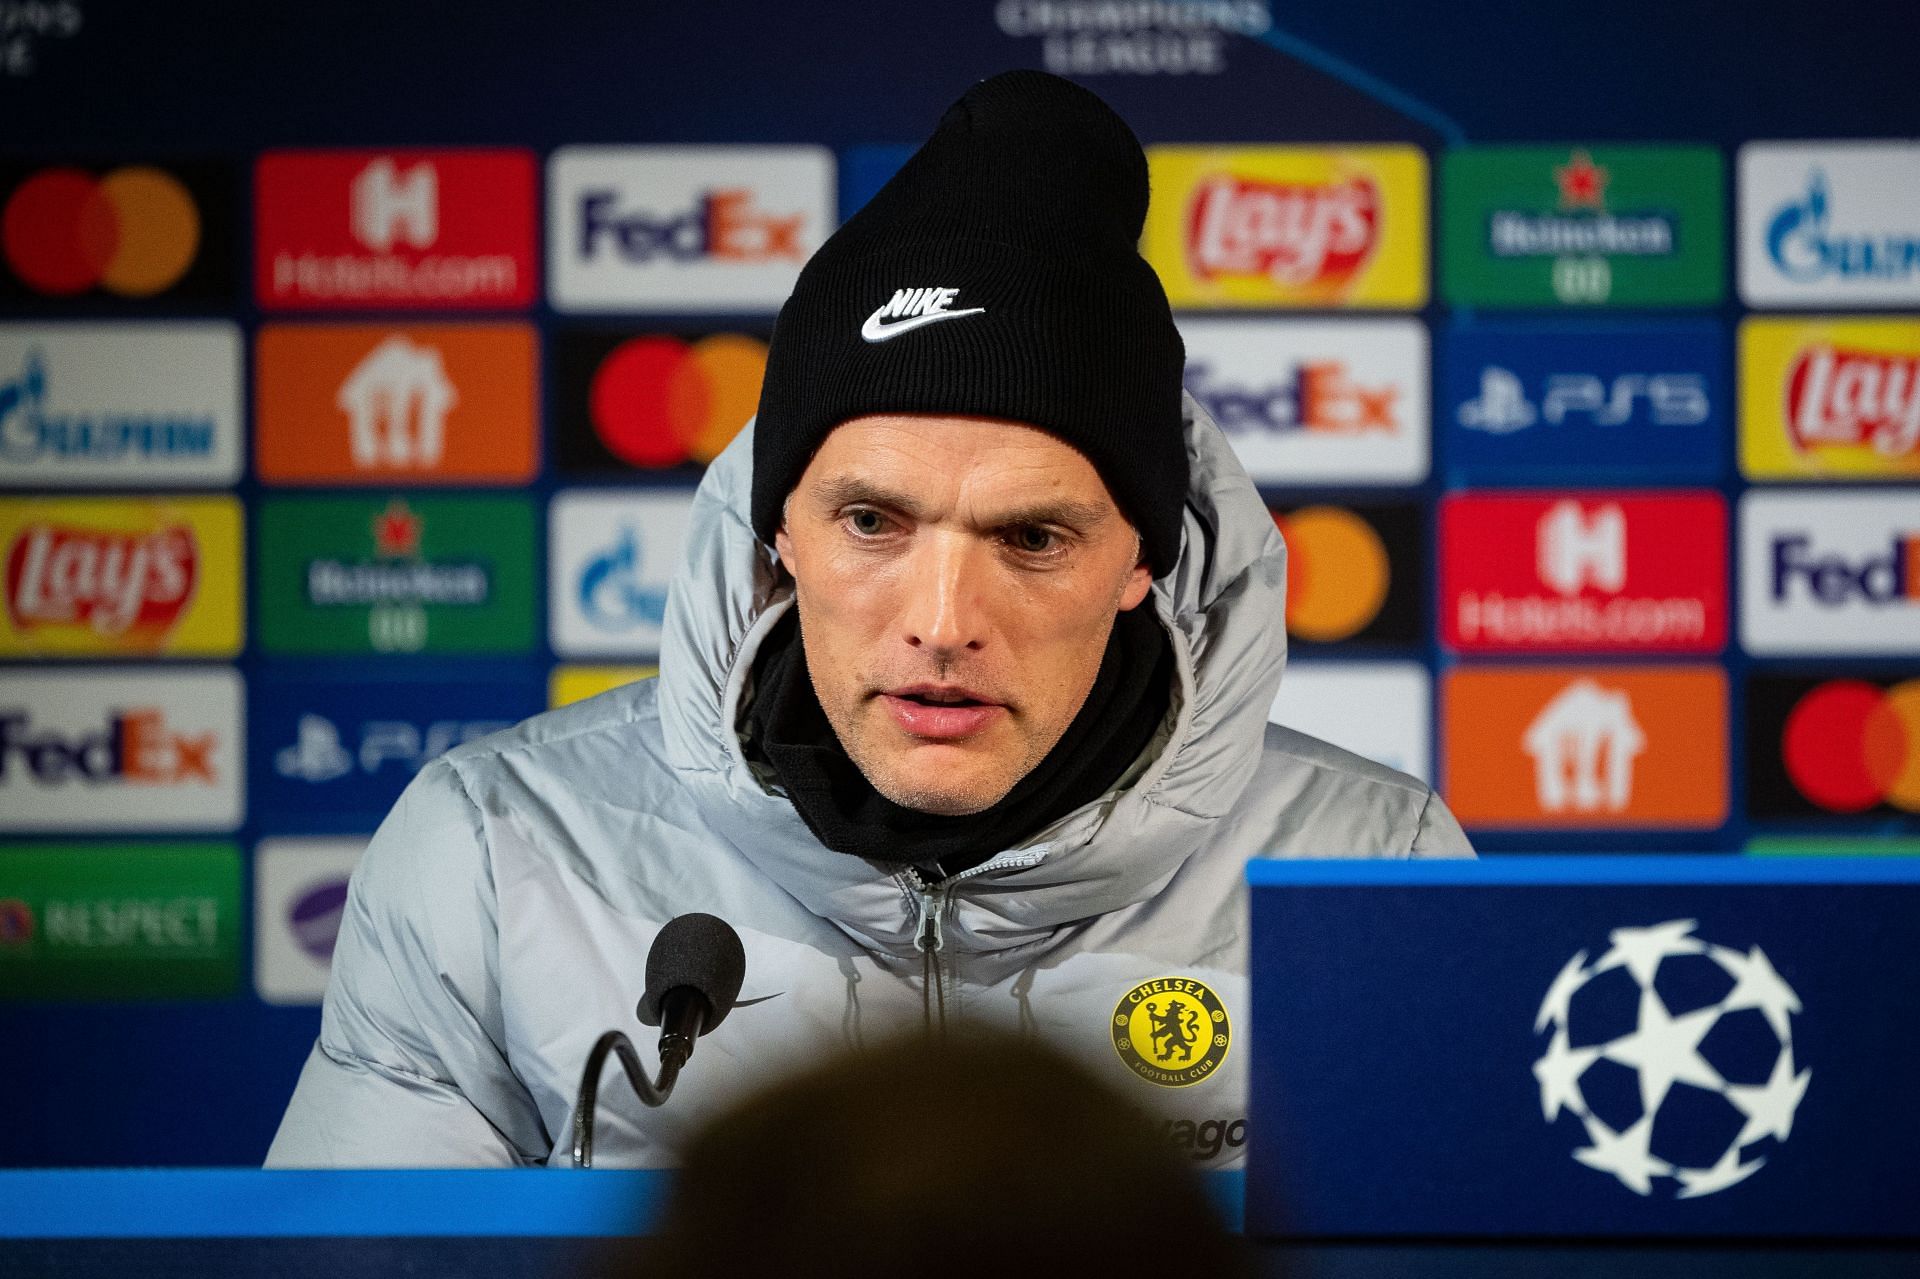 Thomas Tuchel has expressed a desire to stay at Chelsea for many years.